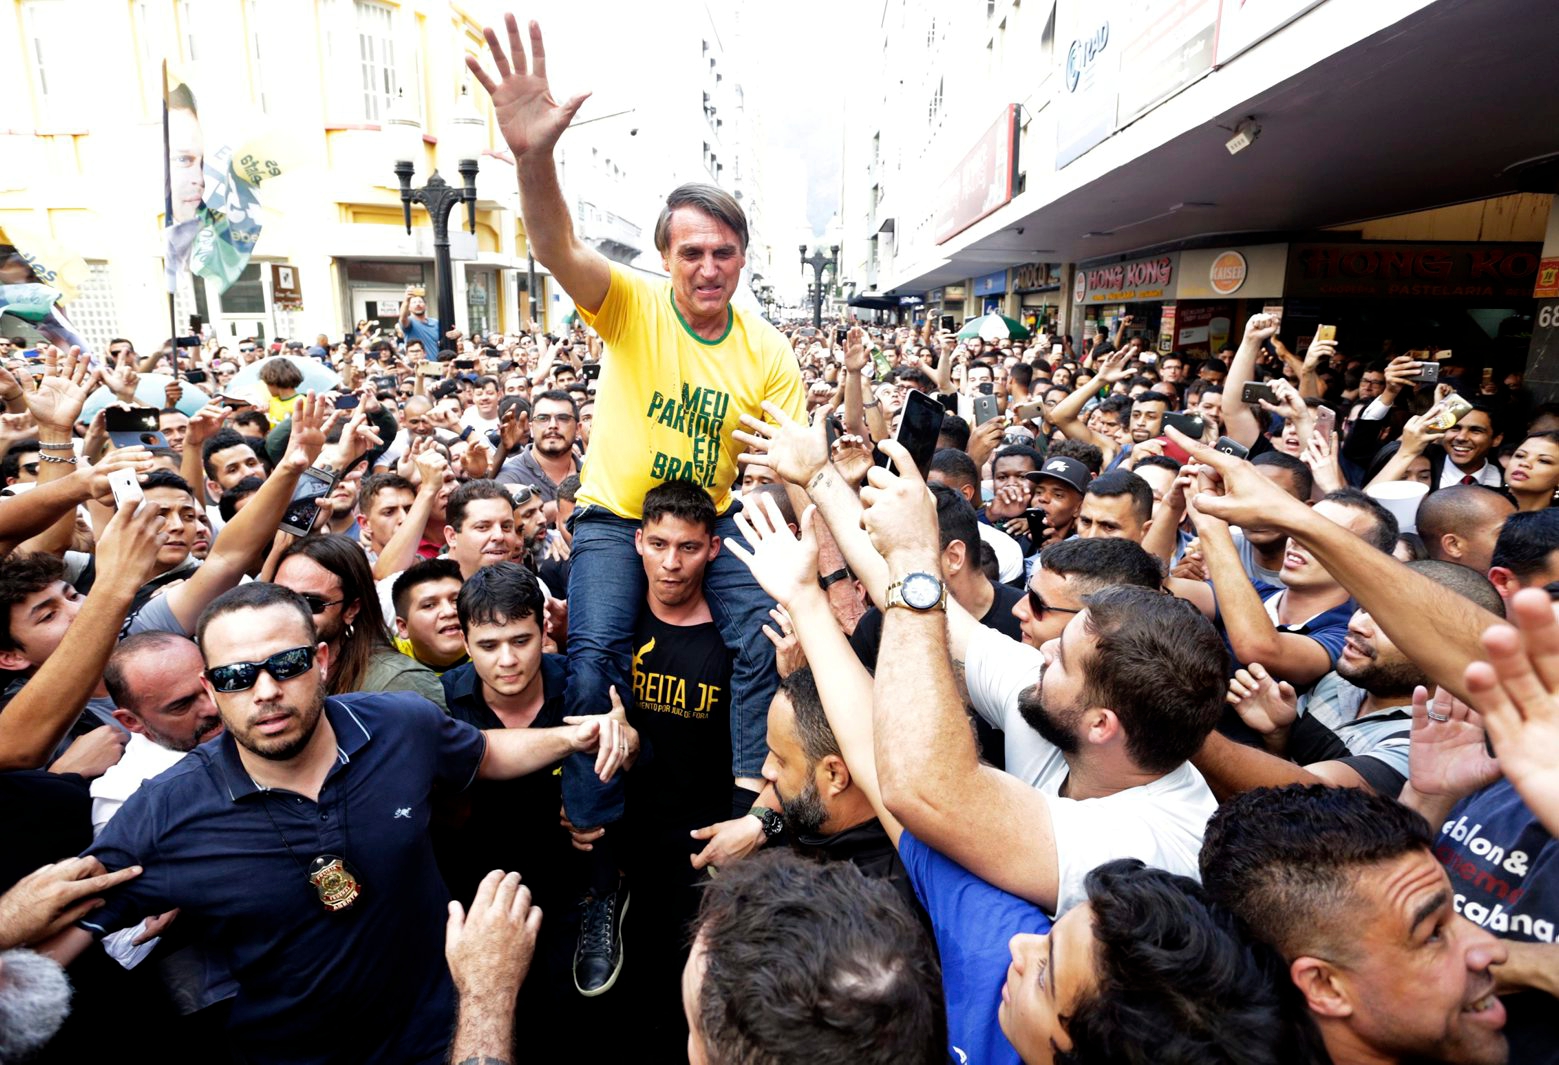 Presidential candidate Jair Bolsonaro is taken on the shoulders of a supporter moments before being stabbed during a campaign rally in Juiz de Fora, Brazil, Thursday, Sept. 6, 2018. Bolsonaro's son said the injury is not life-threatening. (Antonio Scorza/Agencia O Globo via AP) Brazil Candidate Stabbed